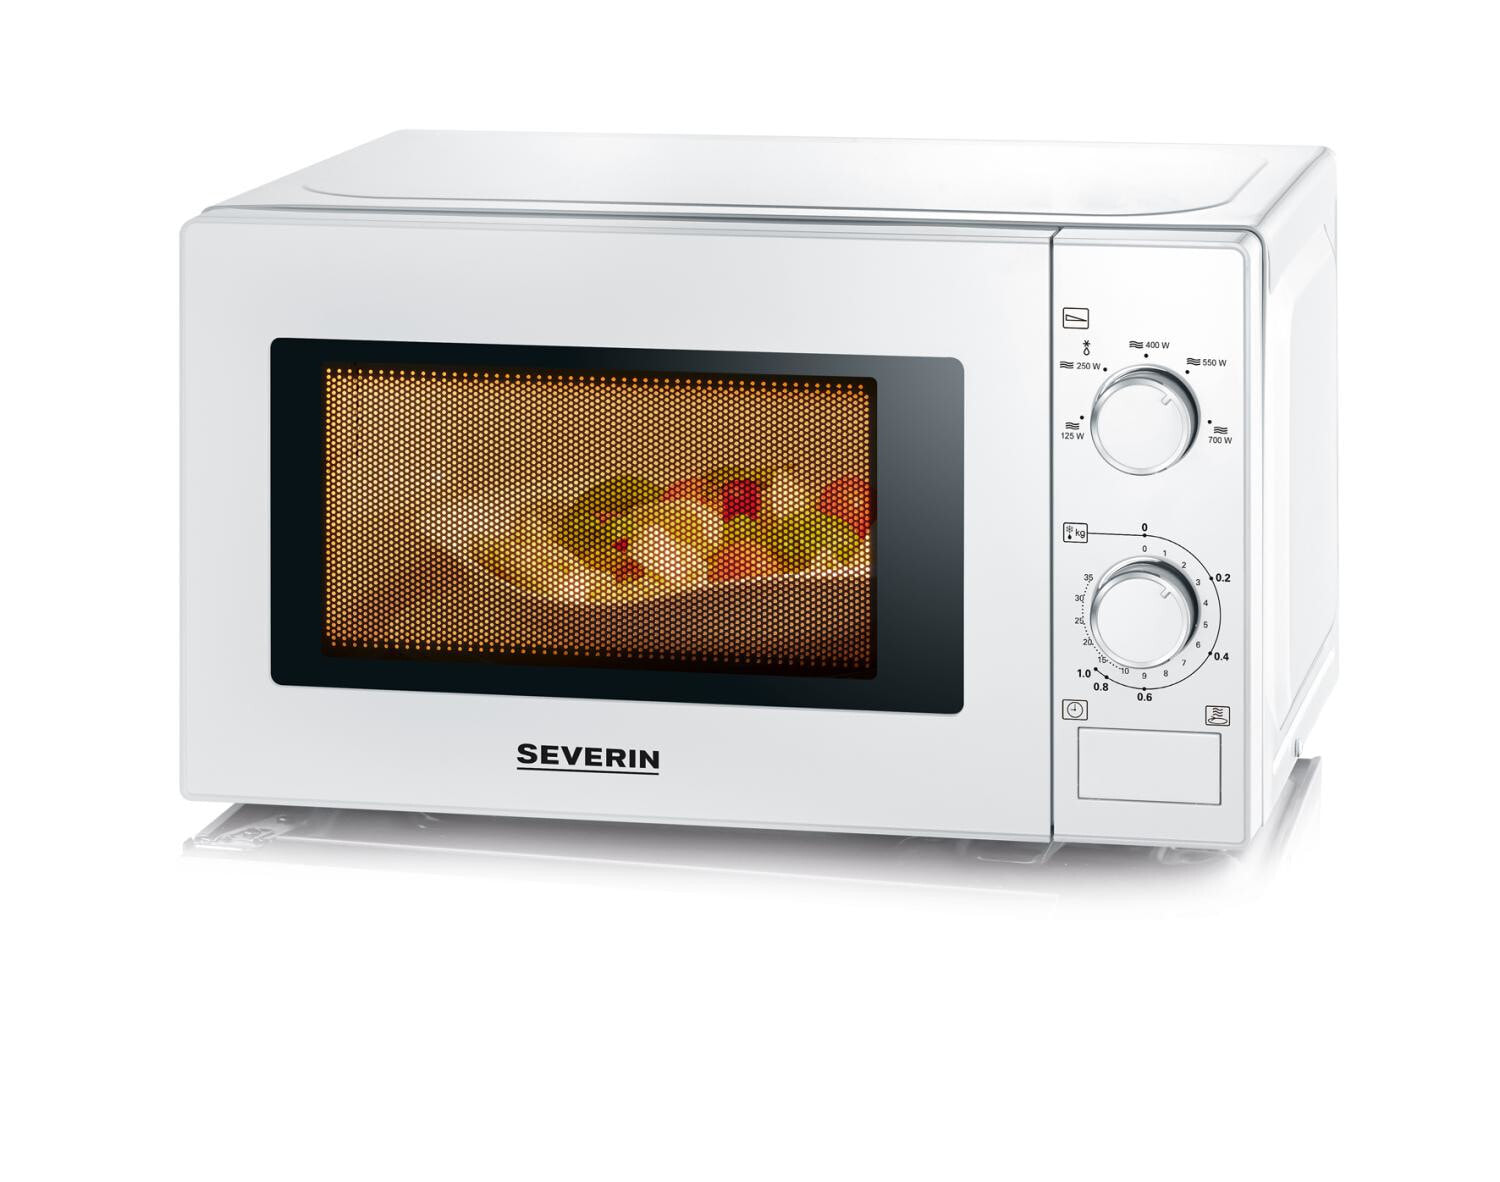 SEVERIN MW 7770 - Countertop - Solo microwave - 20 L - 700 W - Buttons - Rotary - White